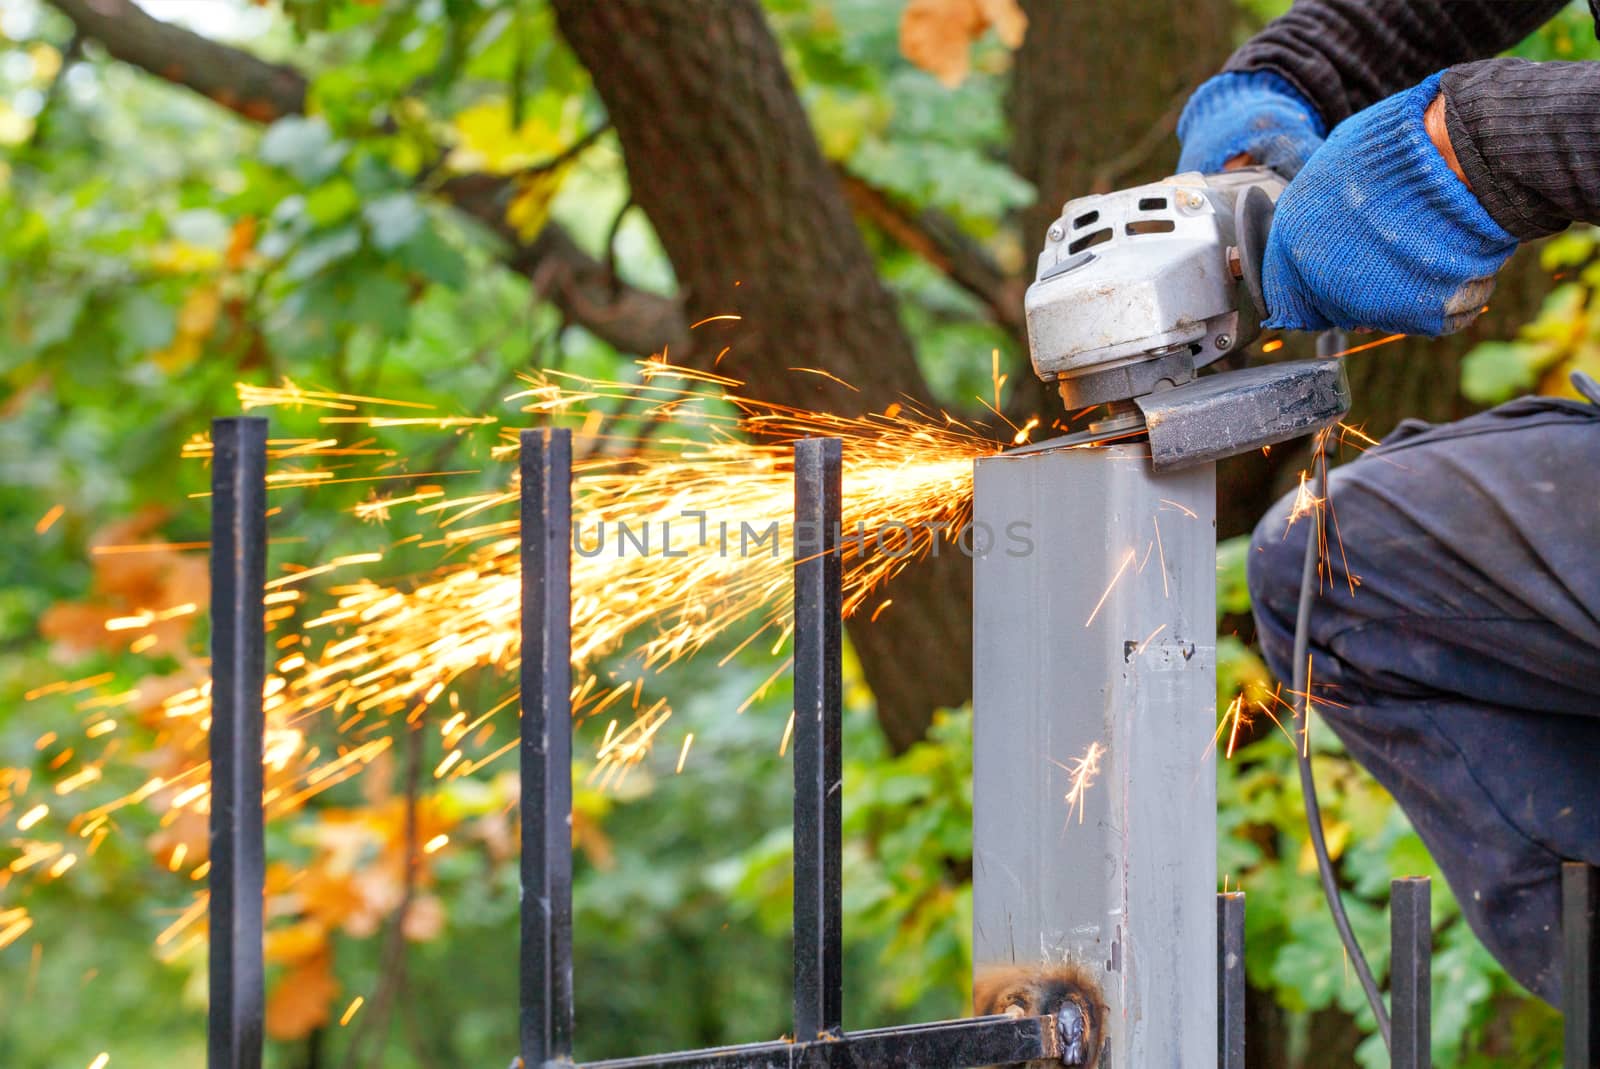 An industrial worker cuts a metal post with a disc angle grinder, creating a bright plume of many hot sparks.